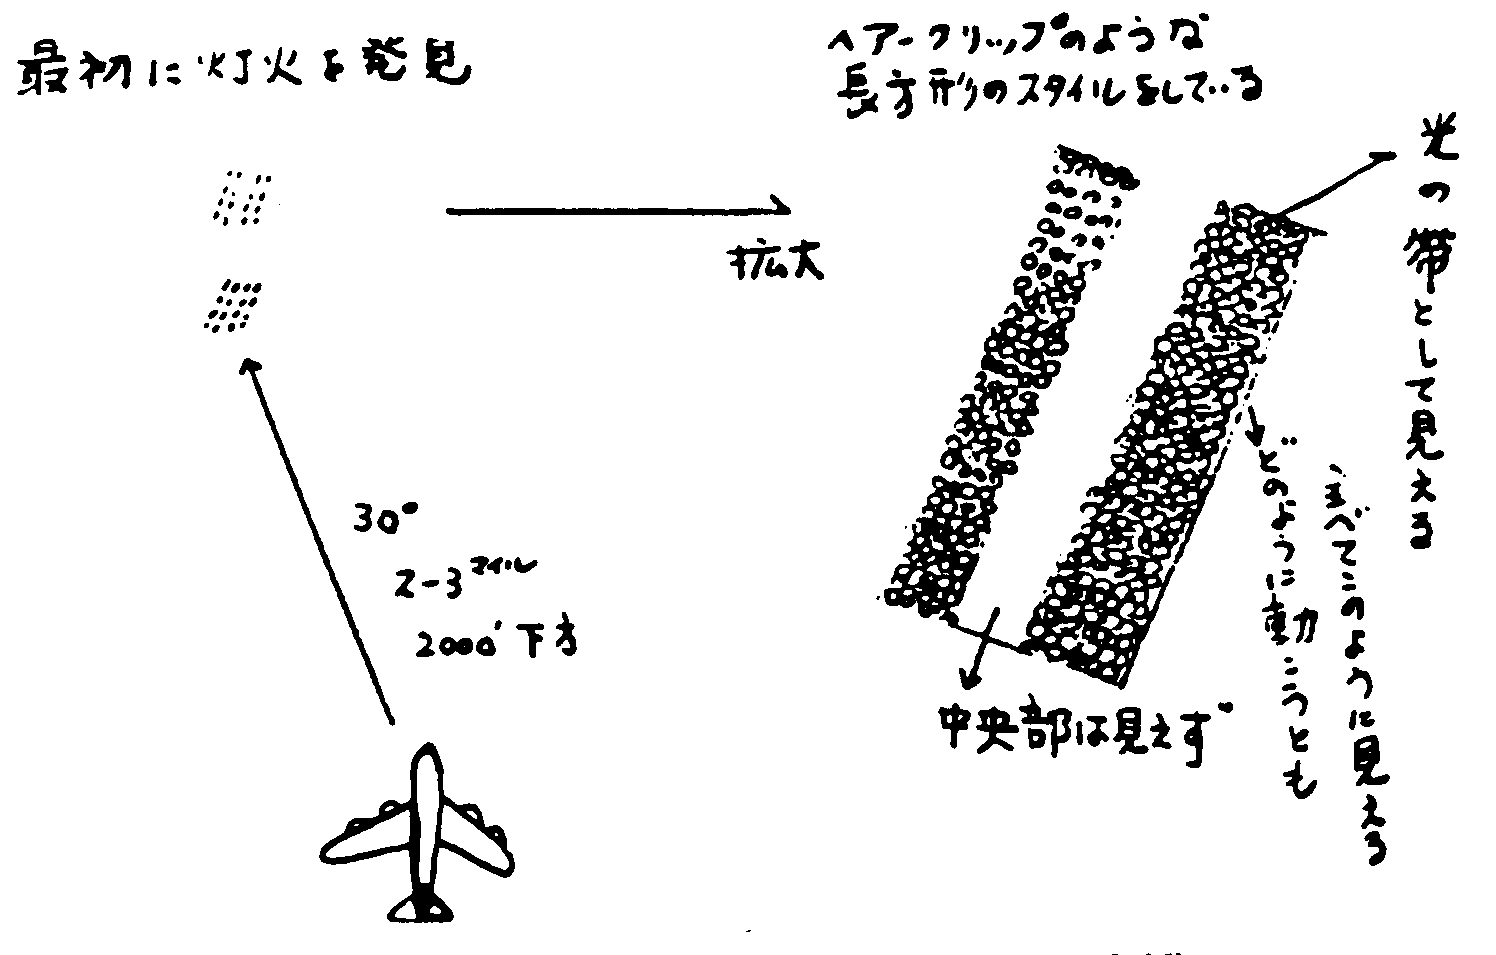 Figure 10: Initial view of "two spaceships" to the left front of airliner